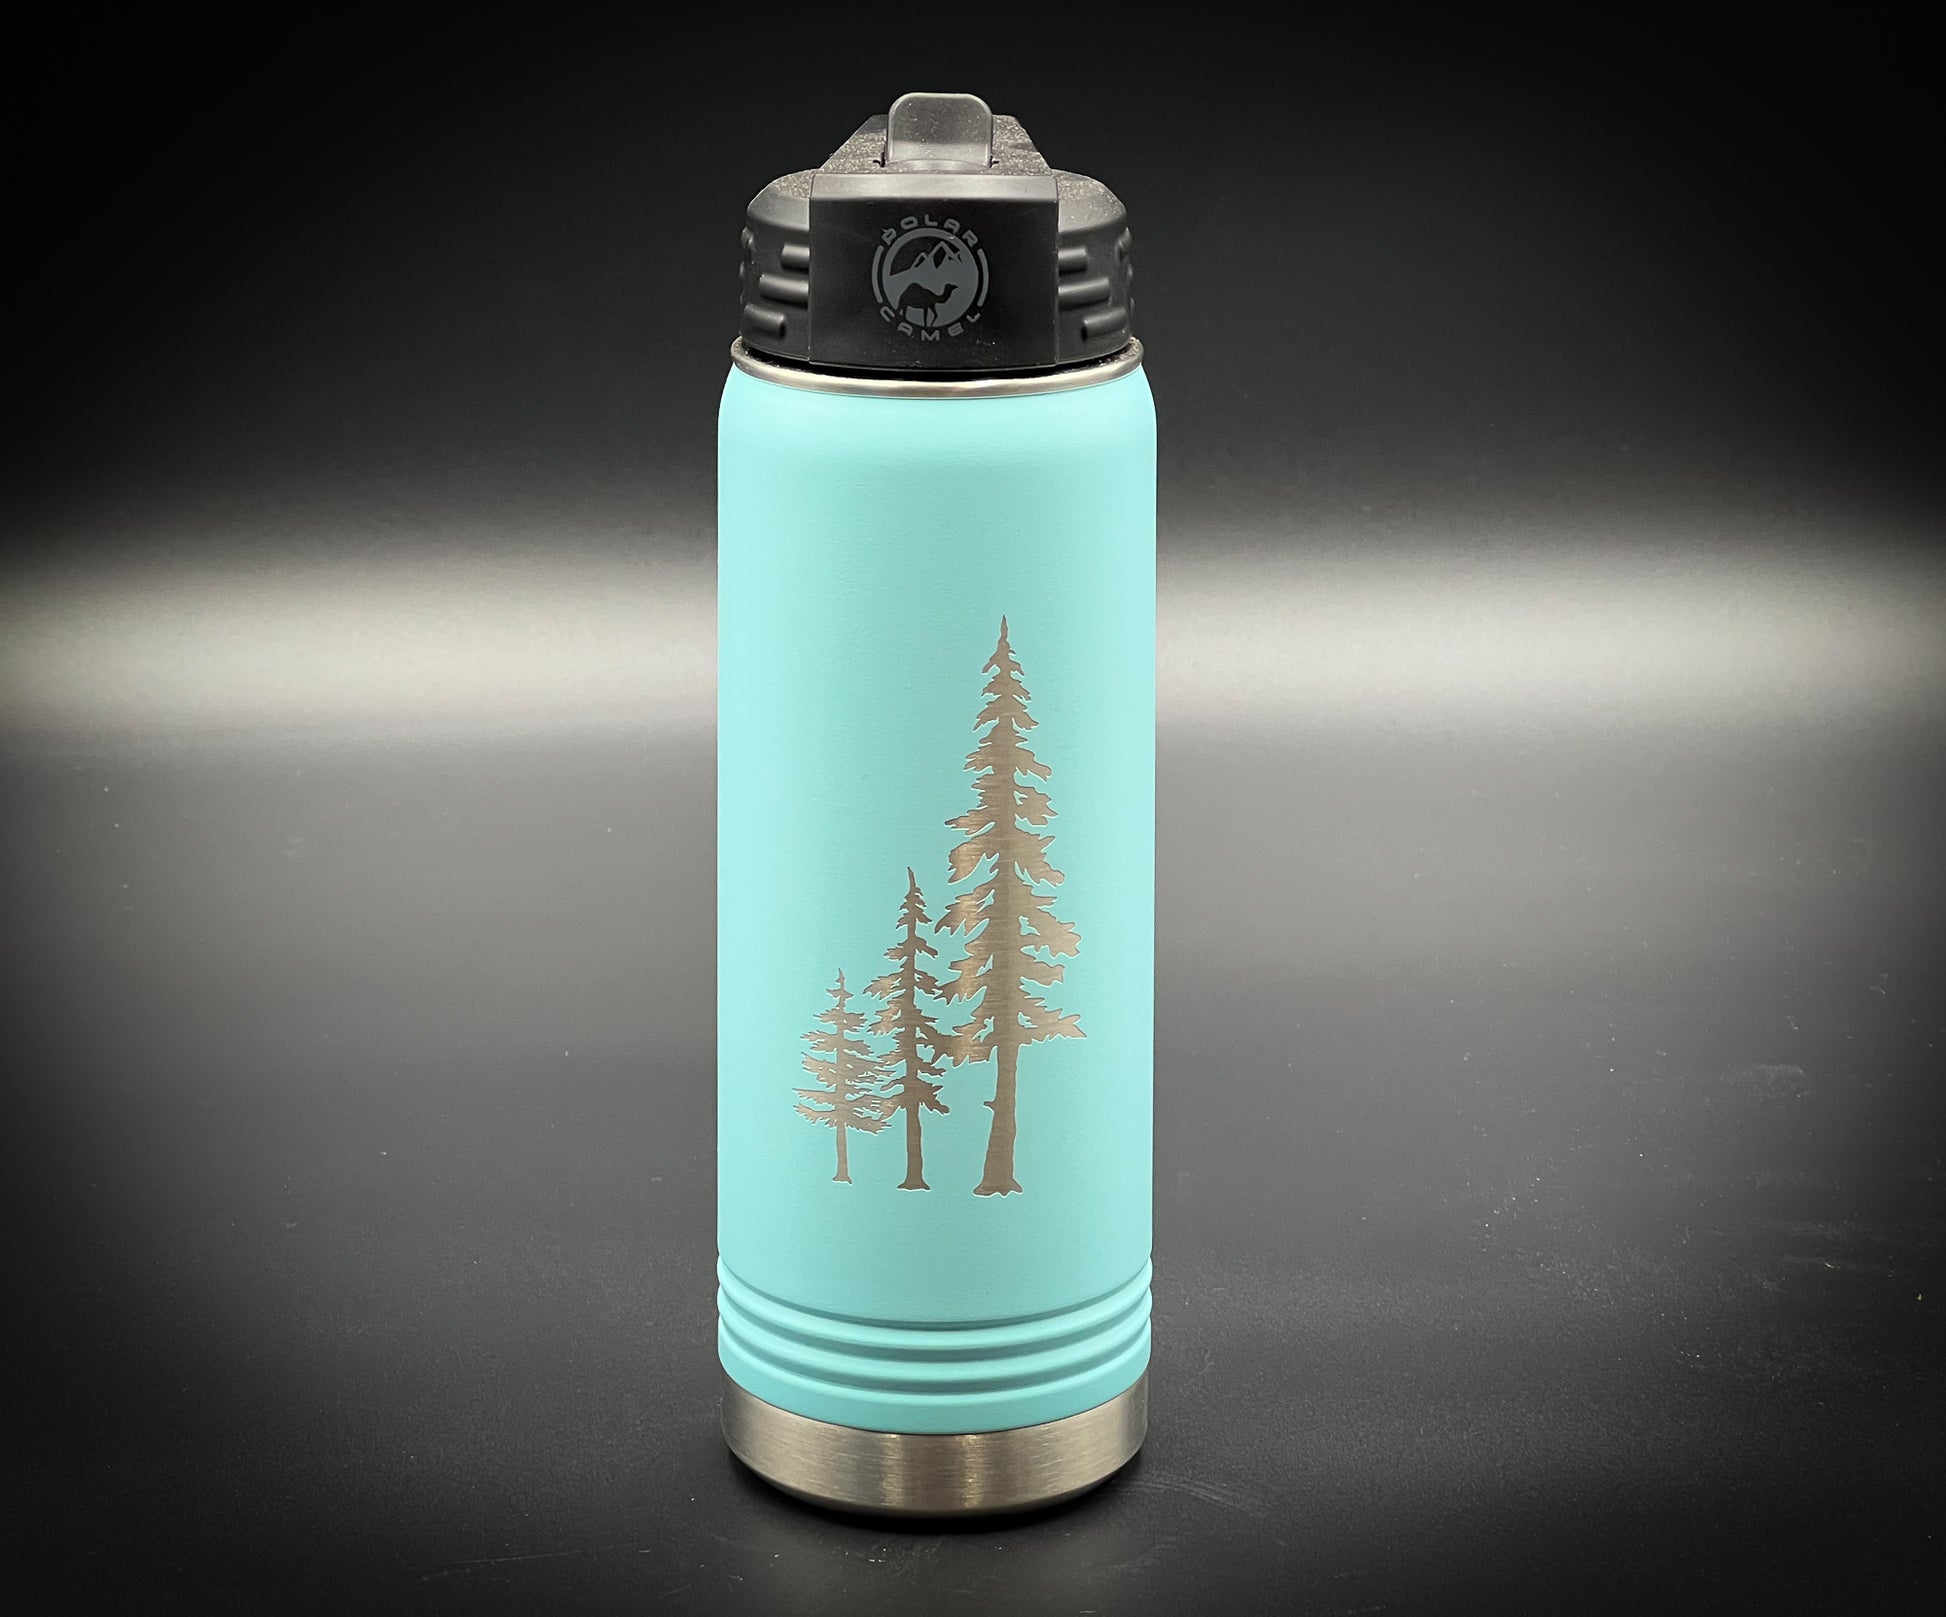 Insulated Water Bottle 20 oz, Stainless Steel Bottle